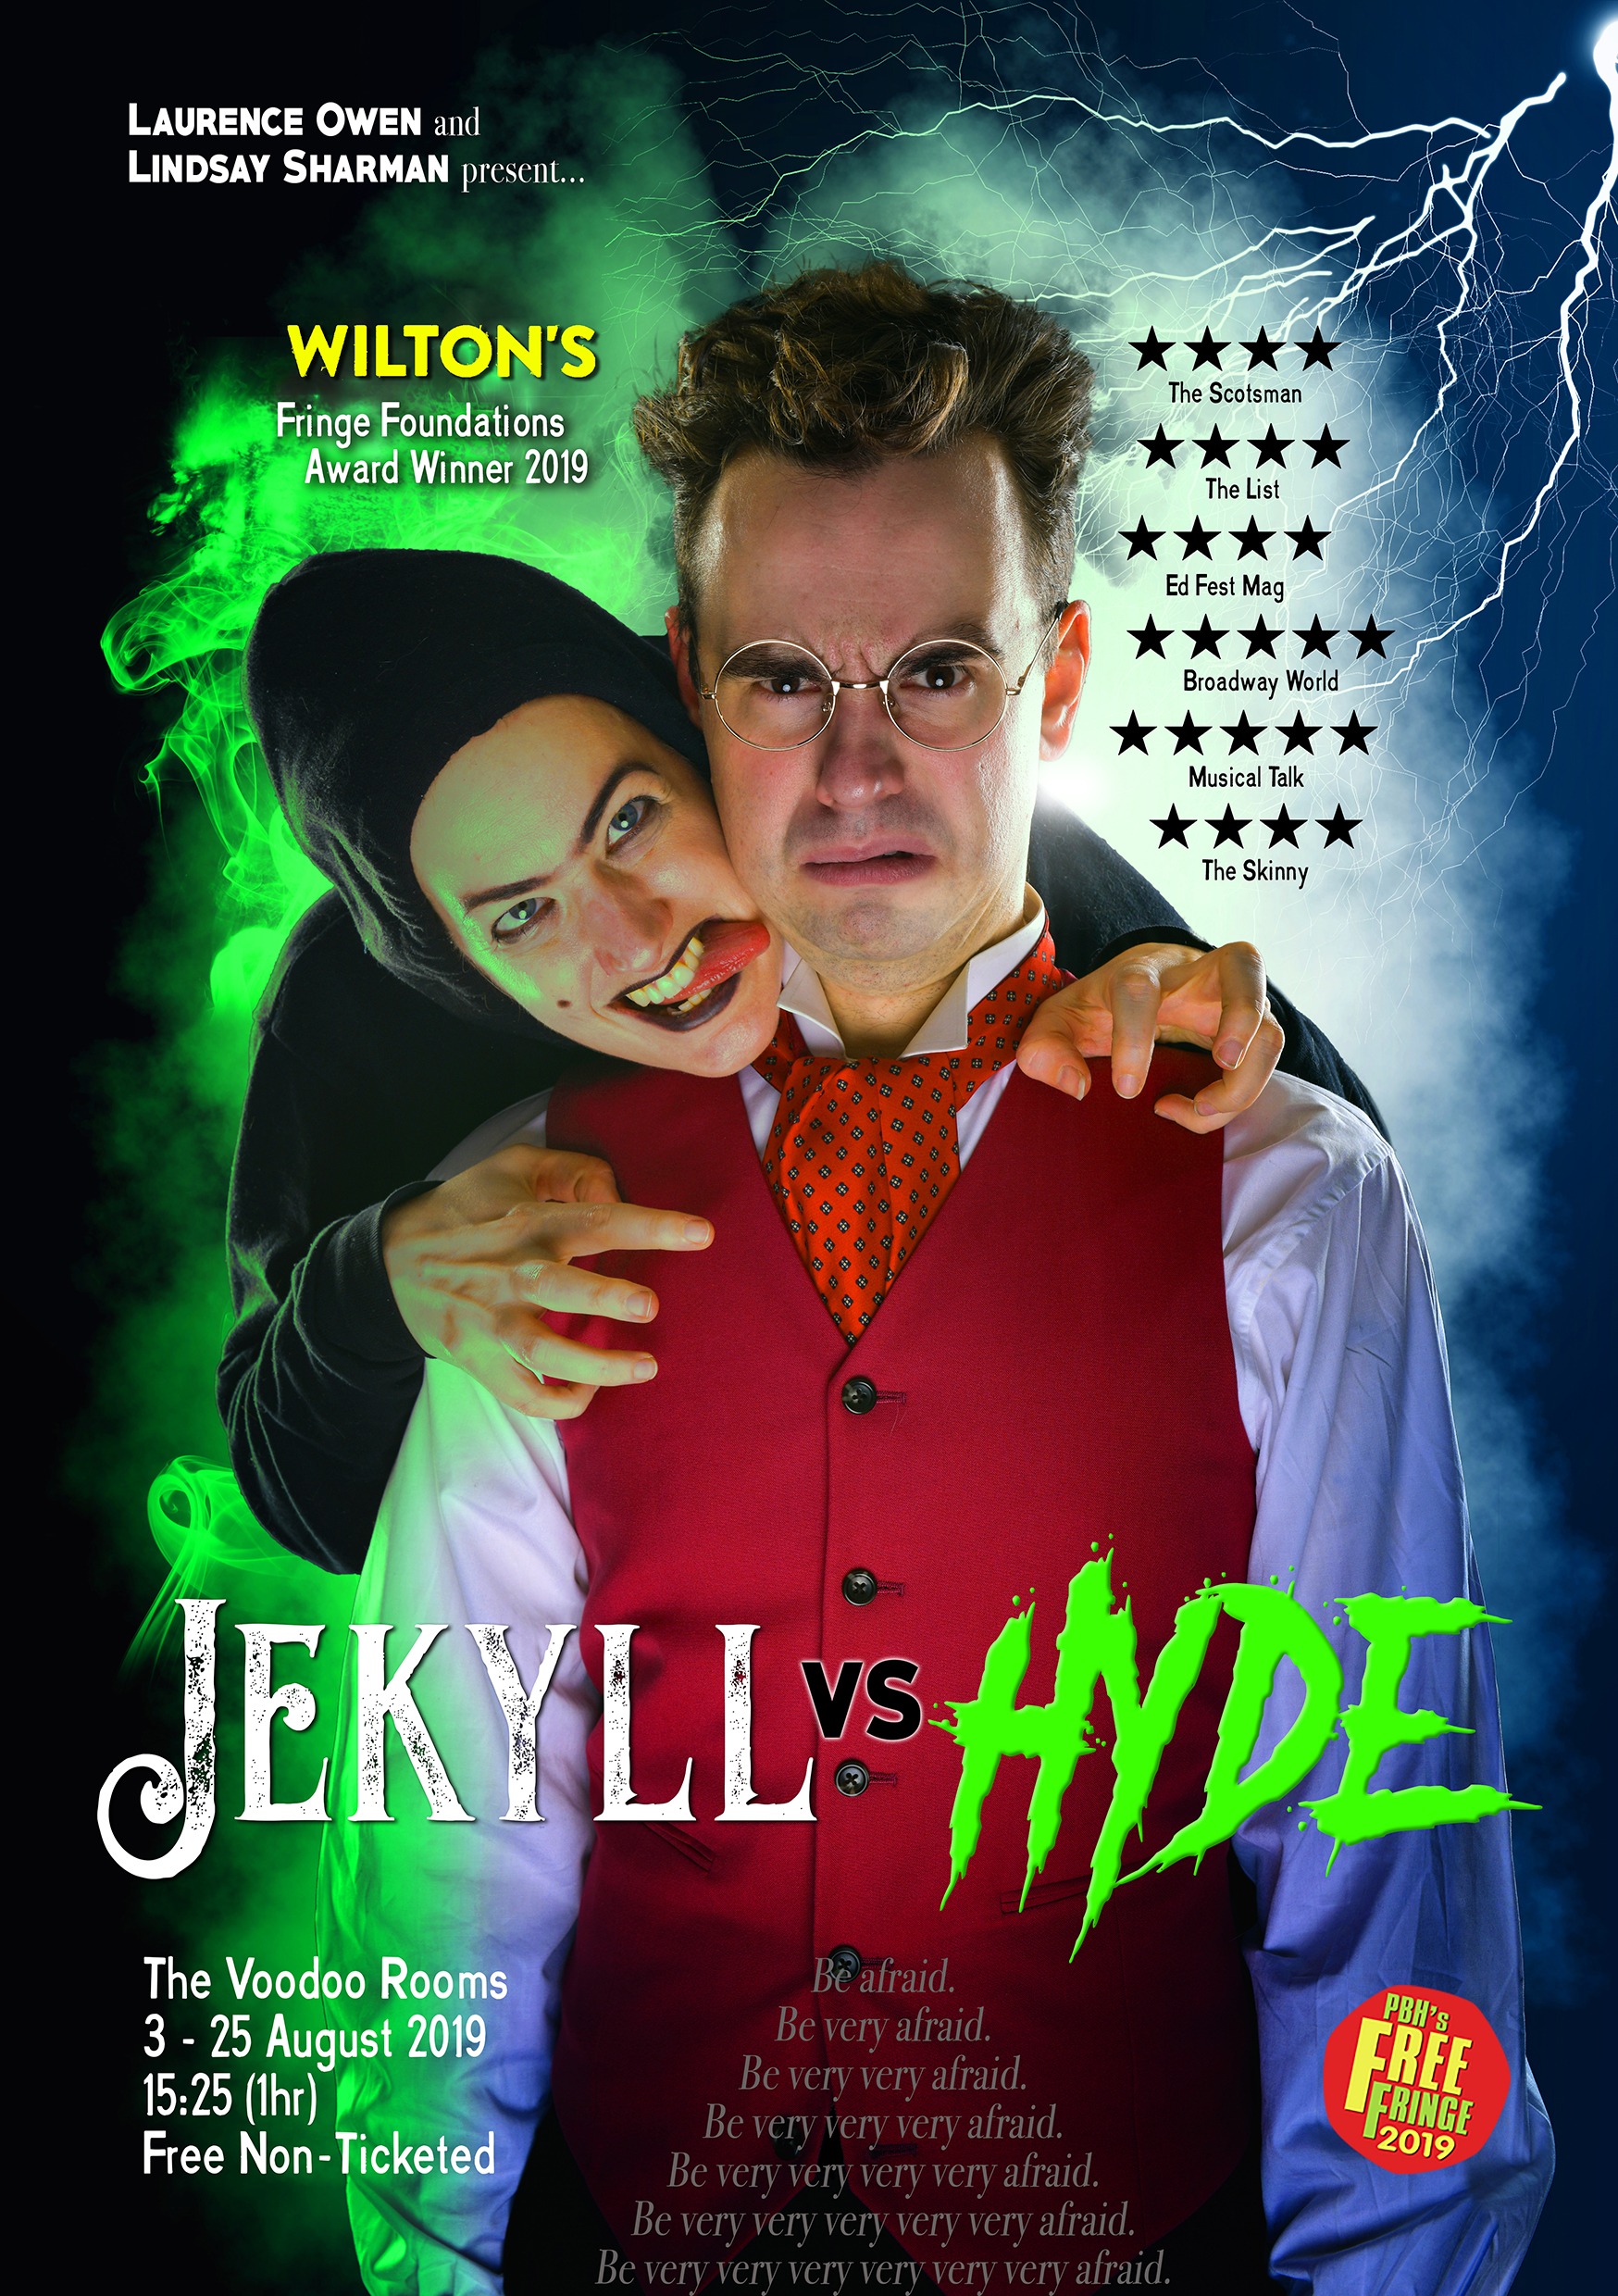 The poster for Jekyll Vs Hyde